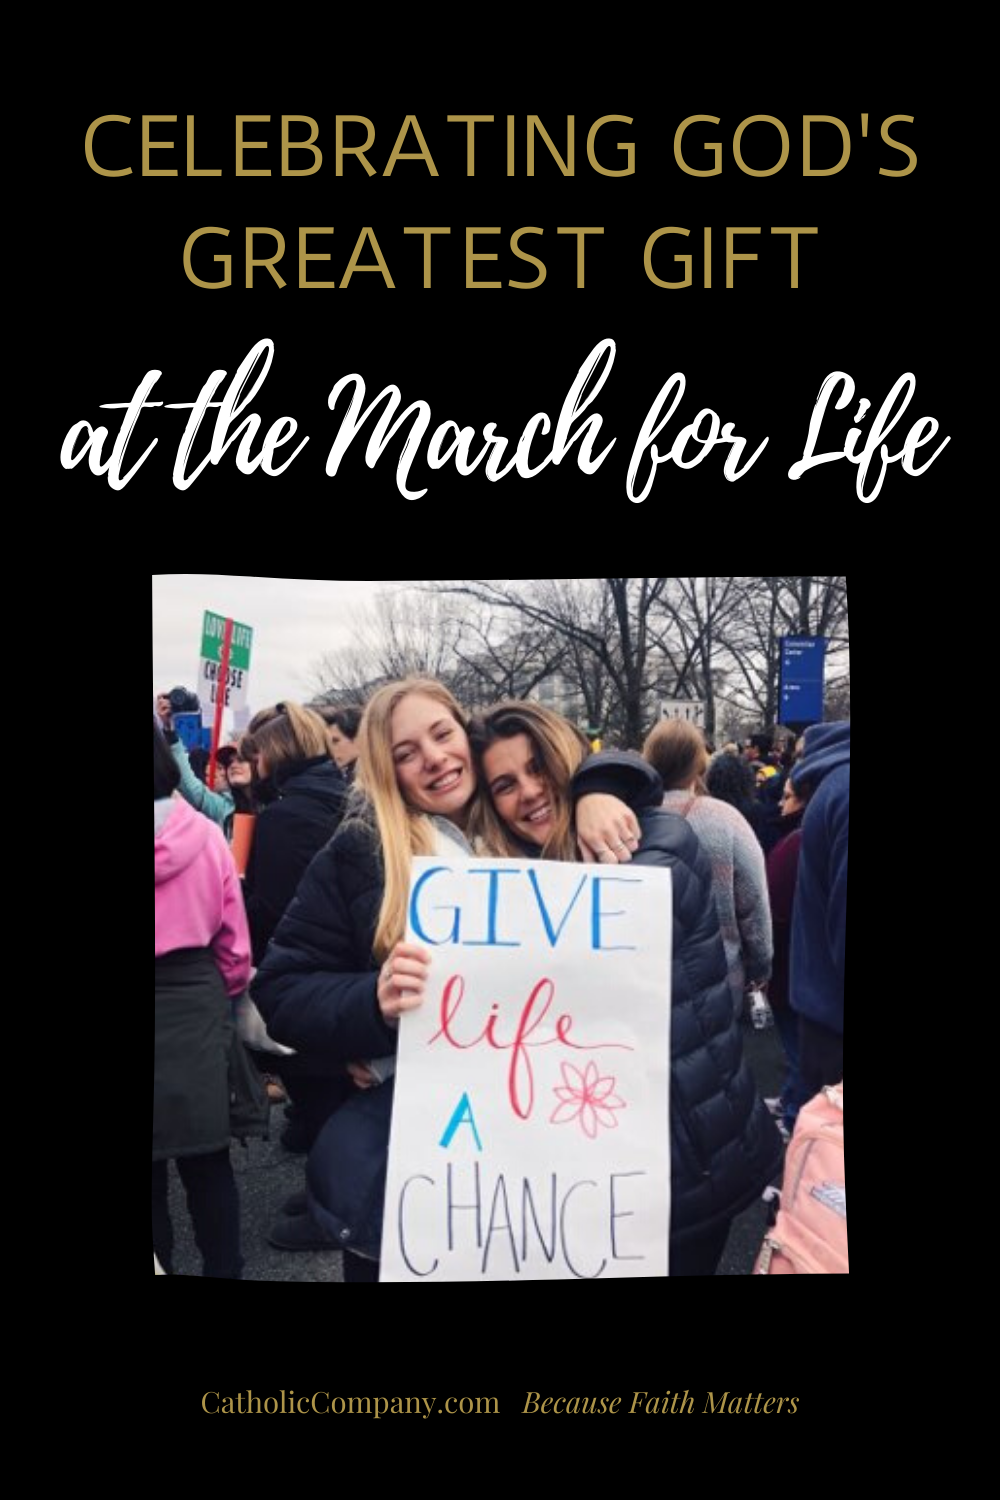 Some thoughts on celebrating the gift of life at the March for Life.